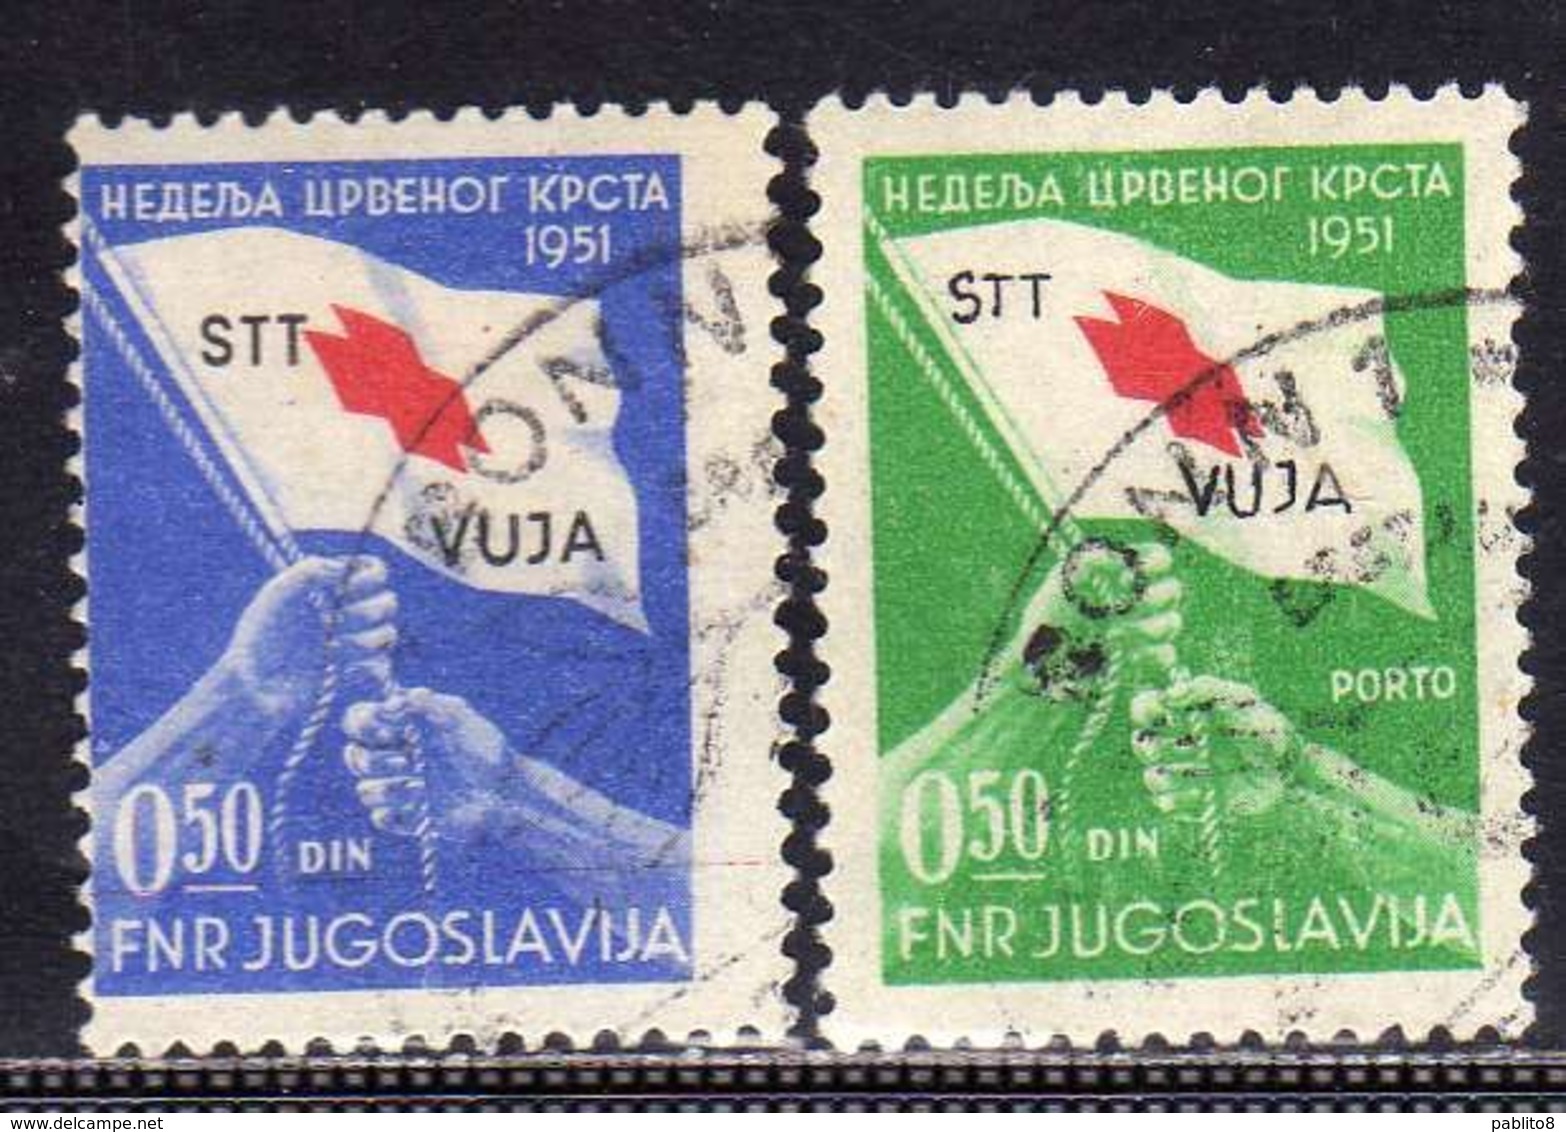 TRIESTE B 1951 CROCE ROSSA RED CROSS CROIX ROUGE SERIE COMPLETA COMPLETE SET USATA USED OBLITERE' - Usados